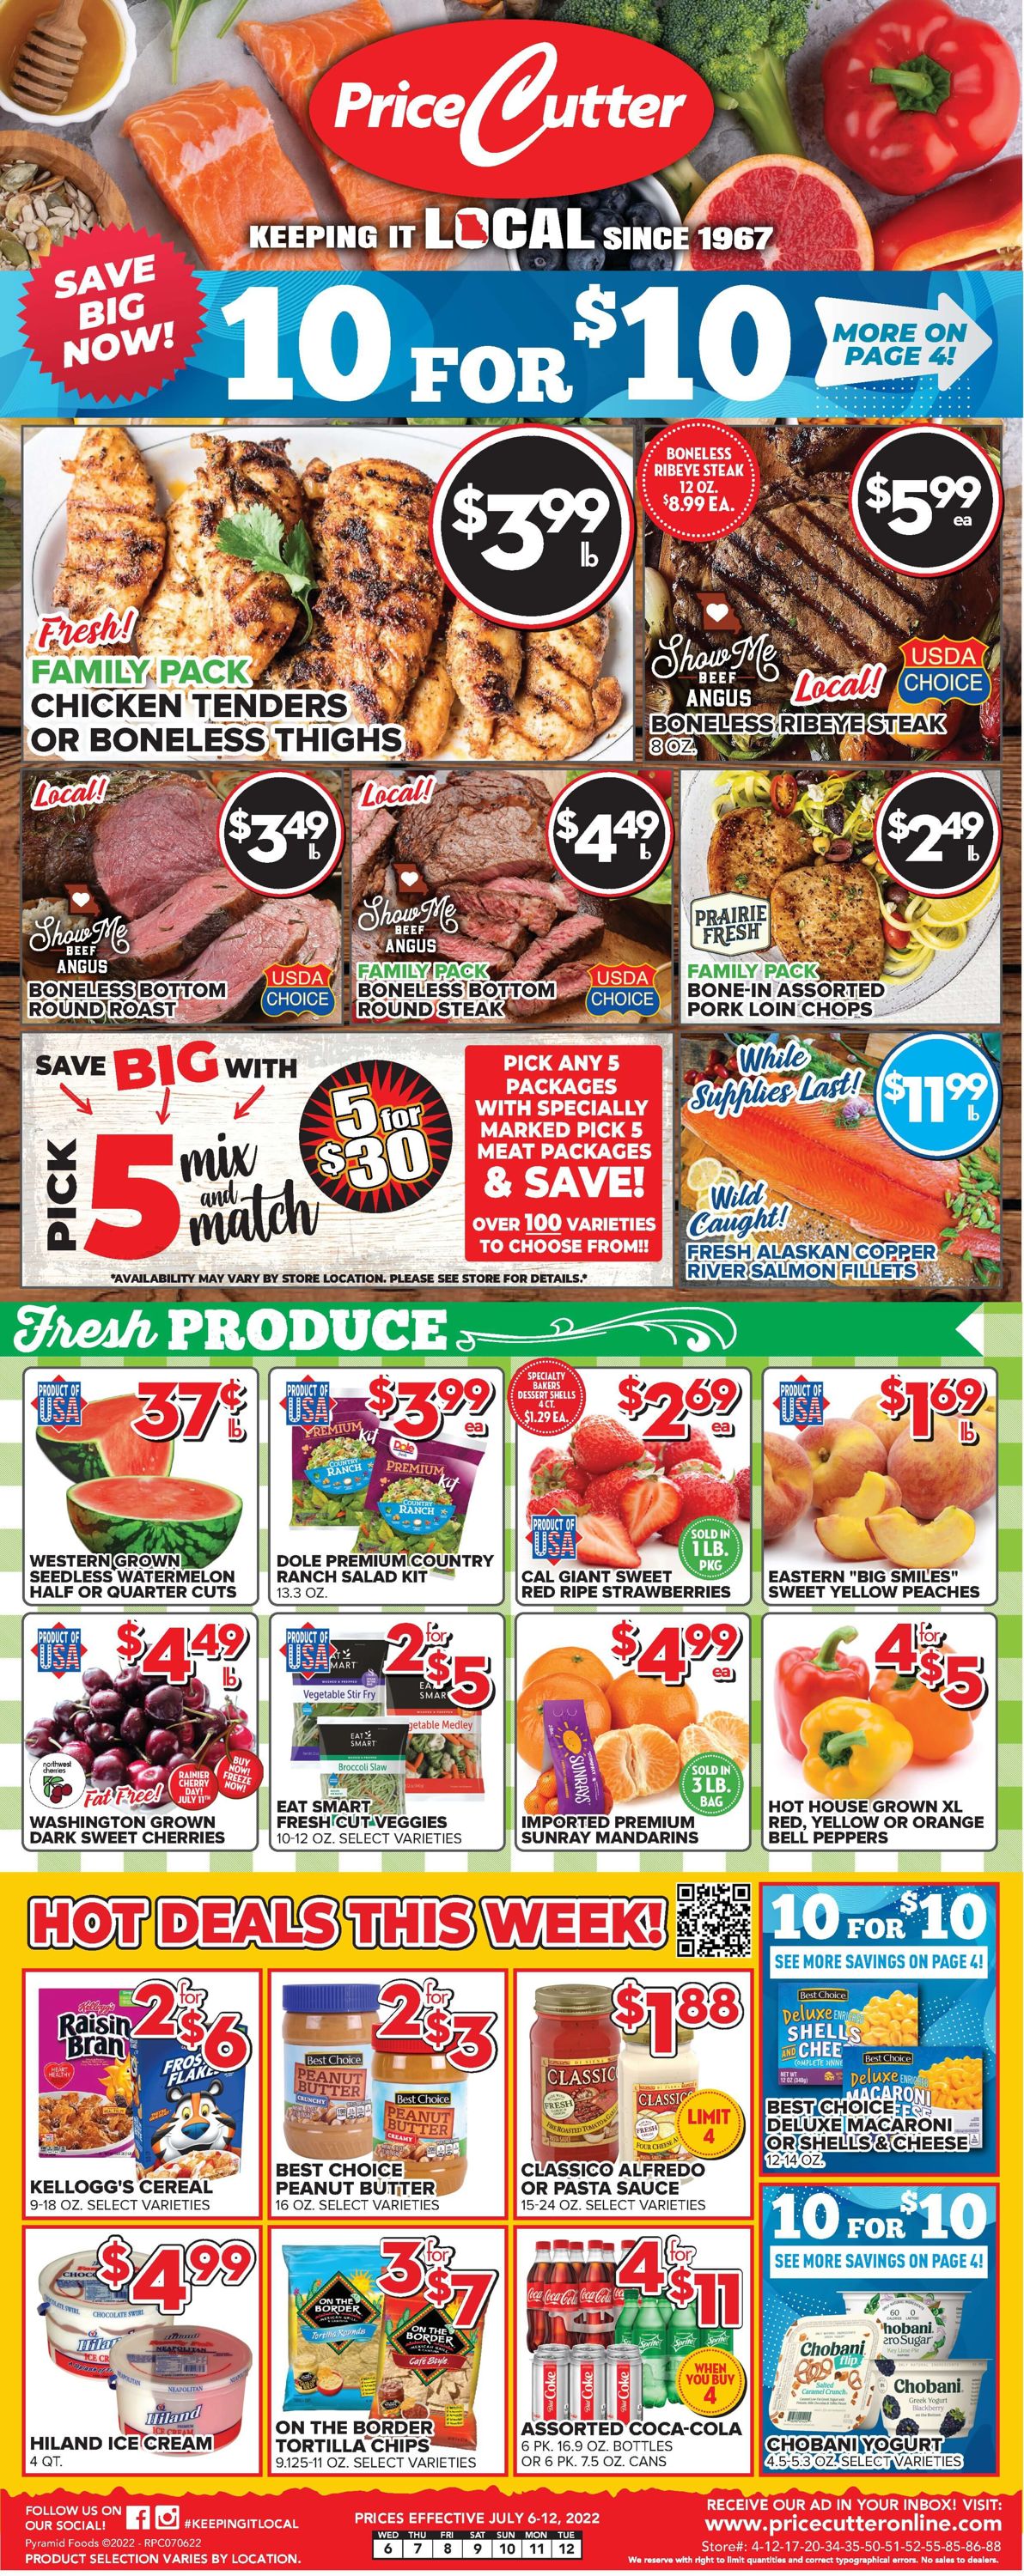 Price Cutter Weekly Ad Circular - valid 07/06-07/12/2022